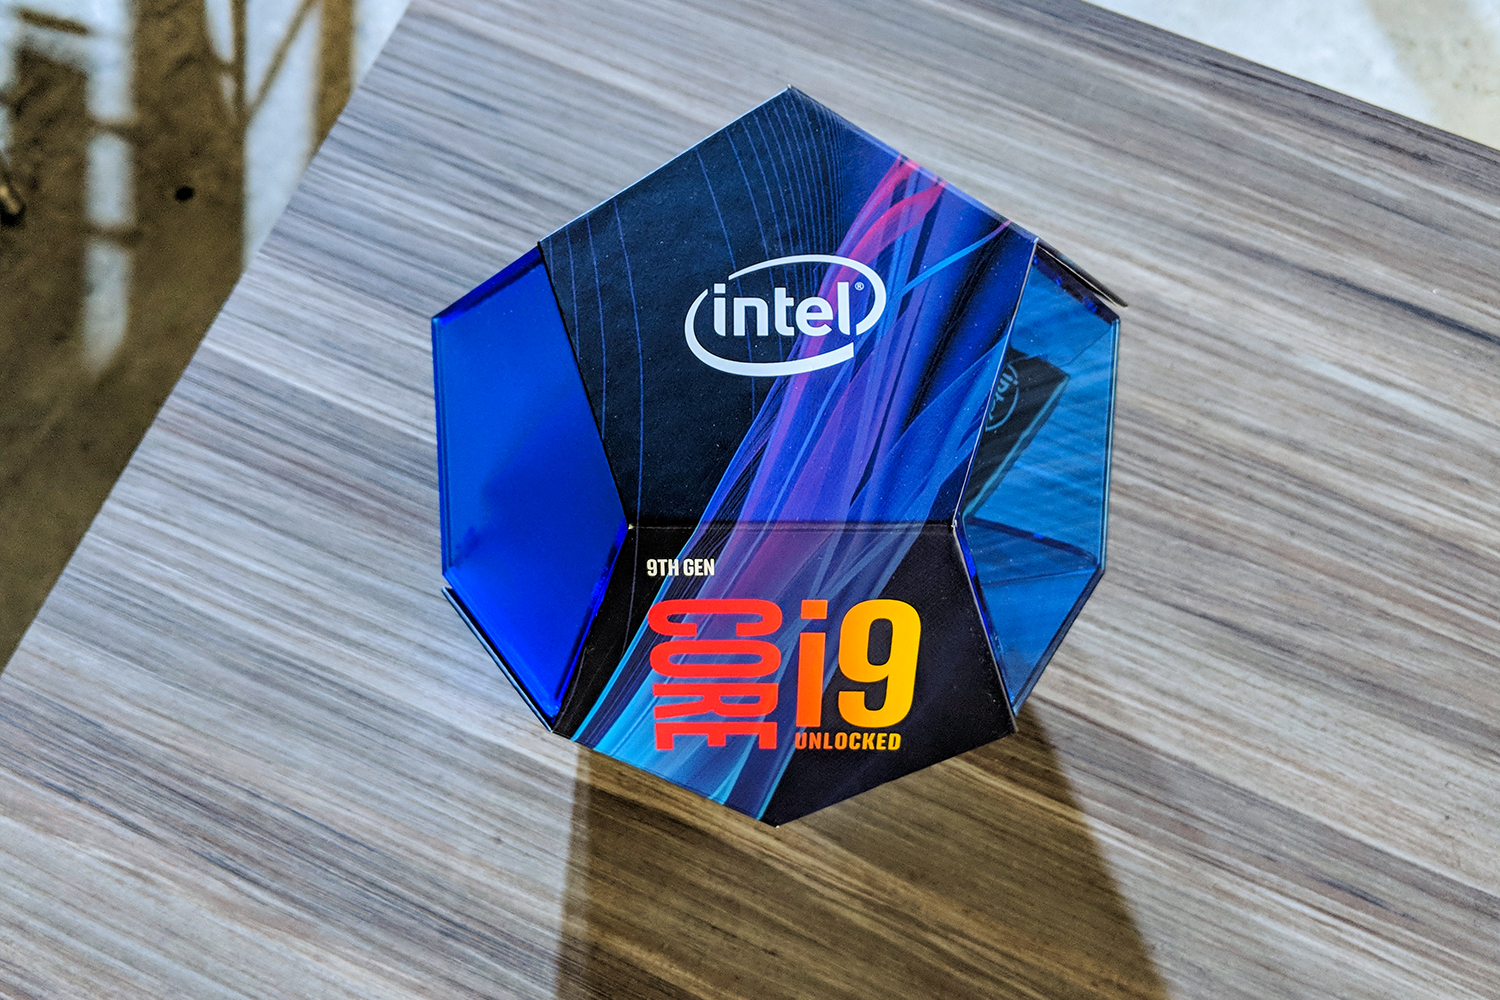 Intel Core i9-9900K: Review and Benchmark